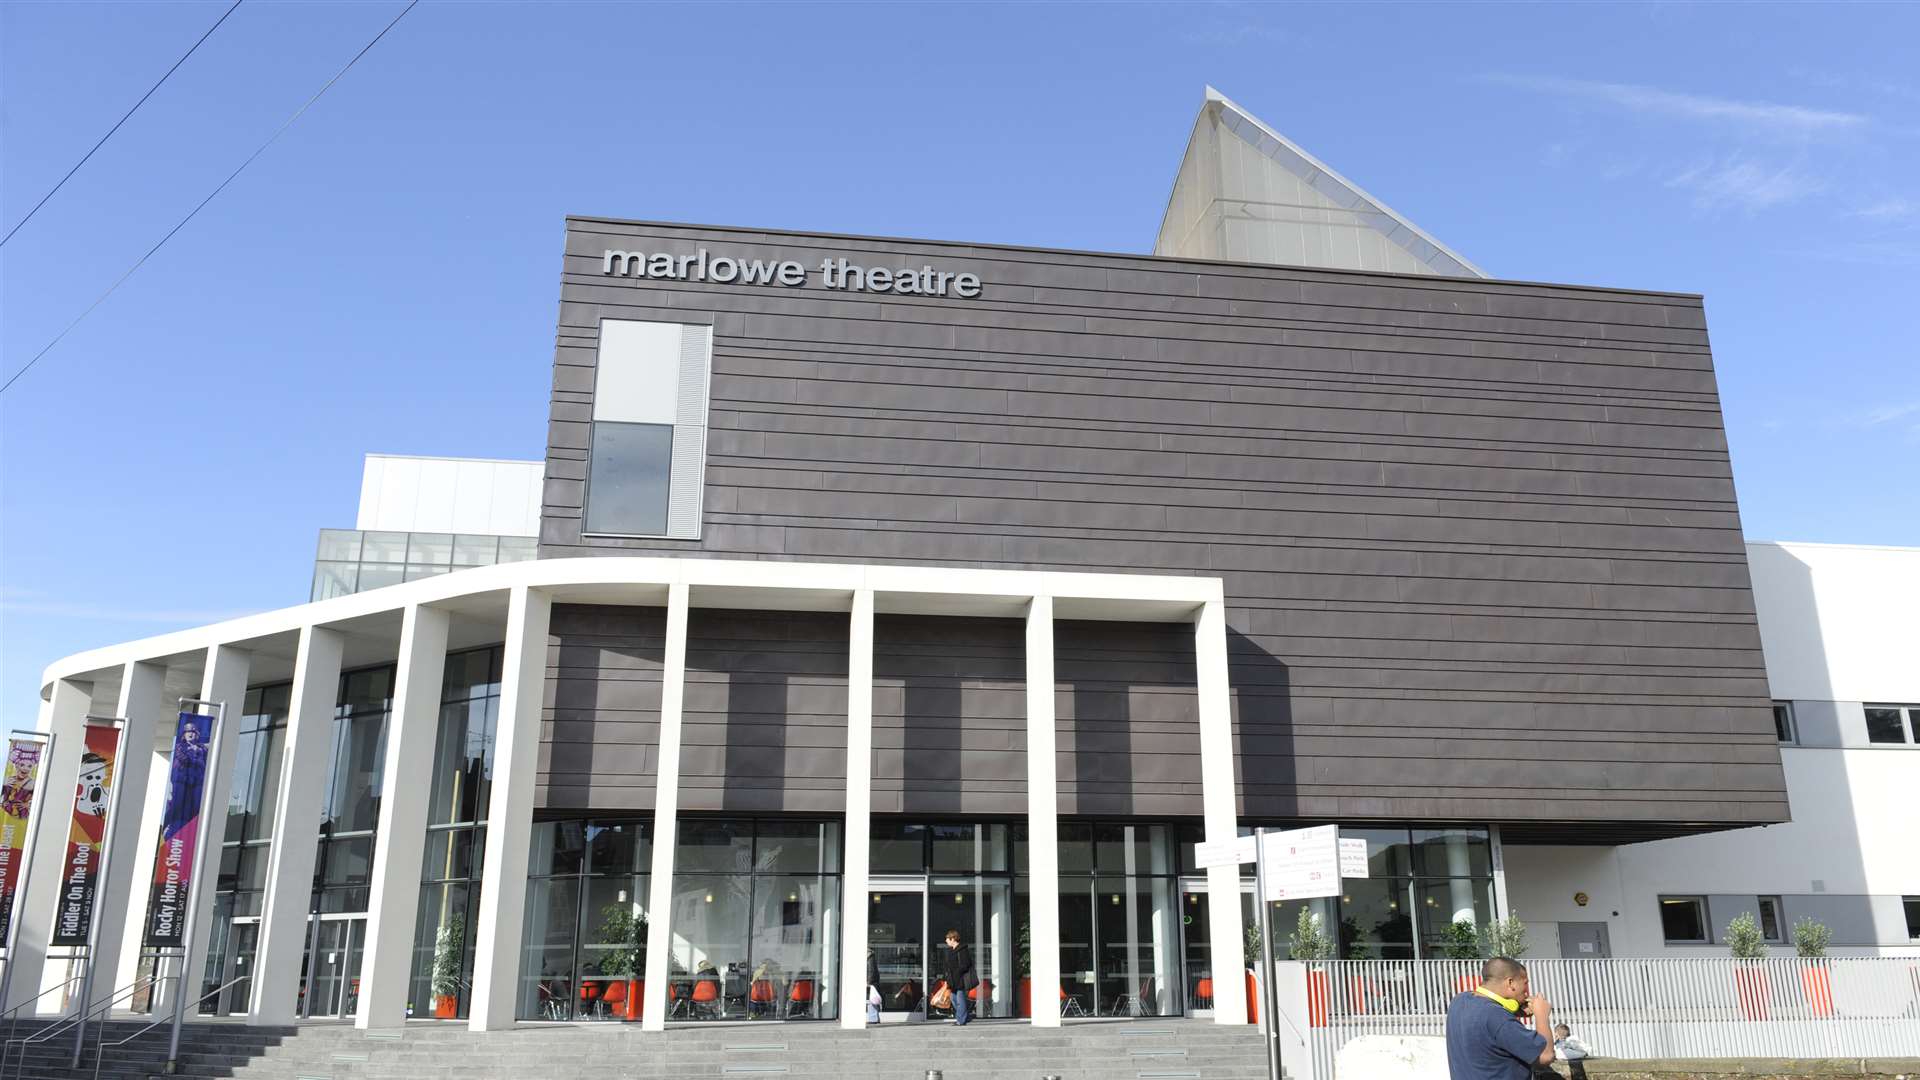 Stephen Belsey was a chef at the Marlowe Theatre in Canterbury